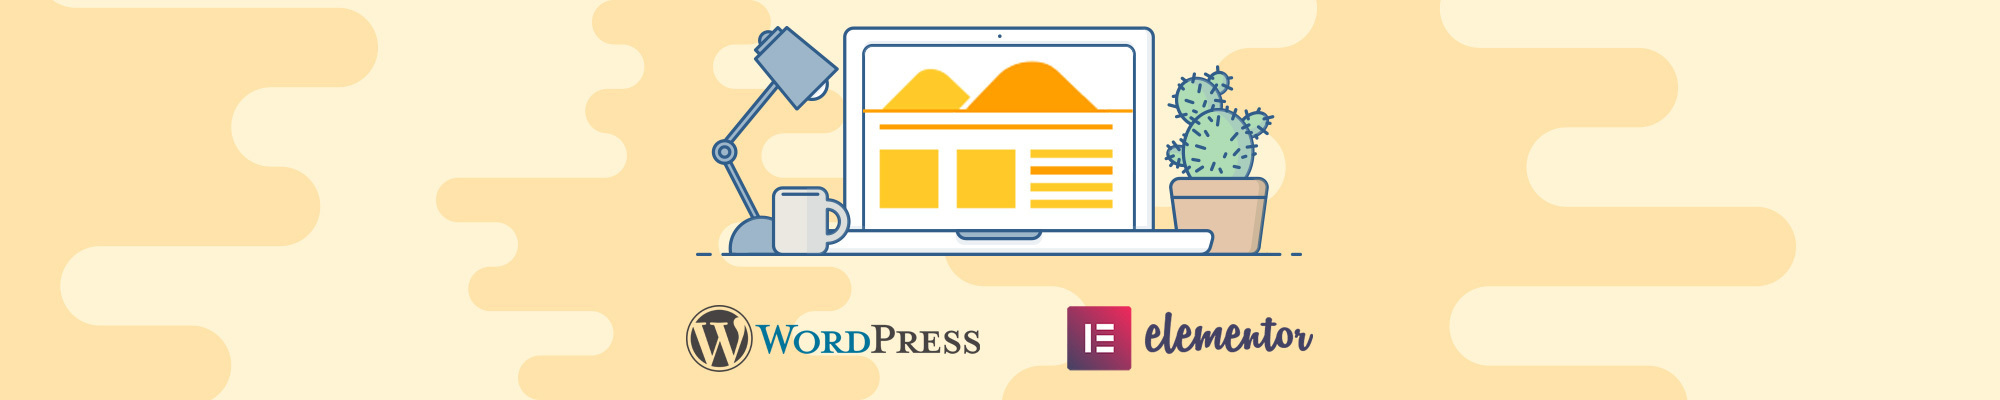 WordPress Landing Pages & Themes with Elementor Pro for websites and WebSops